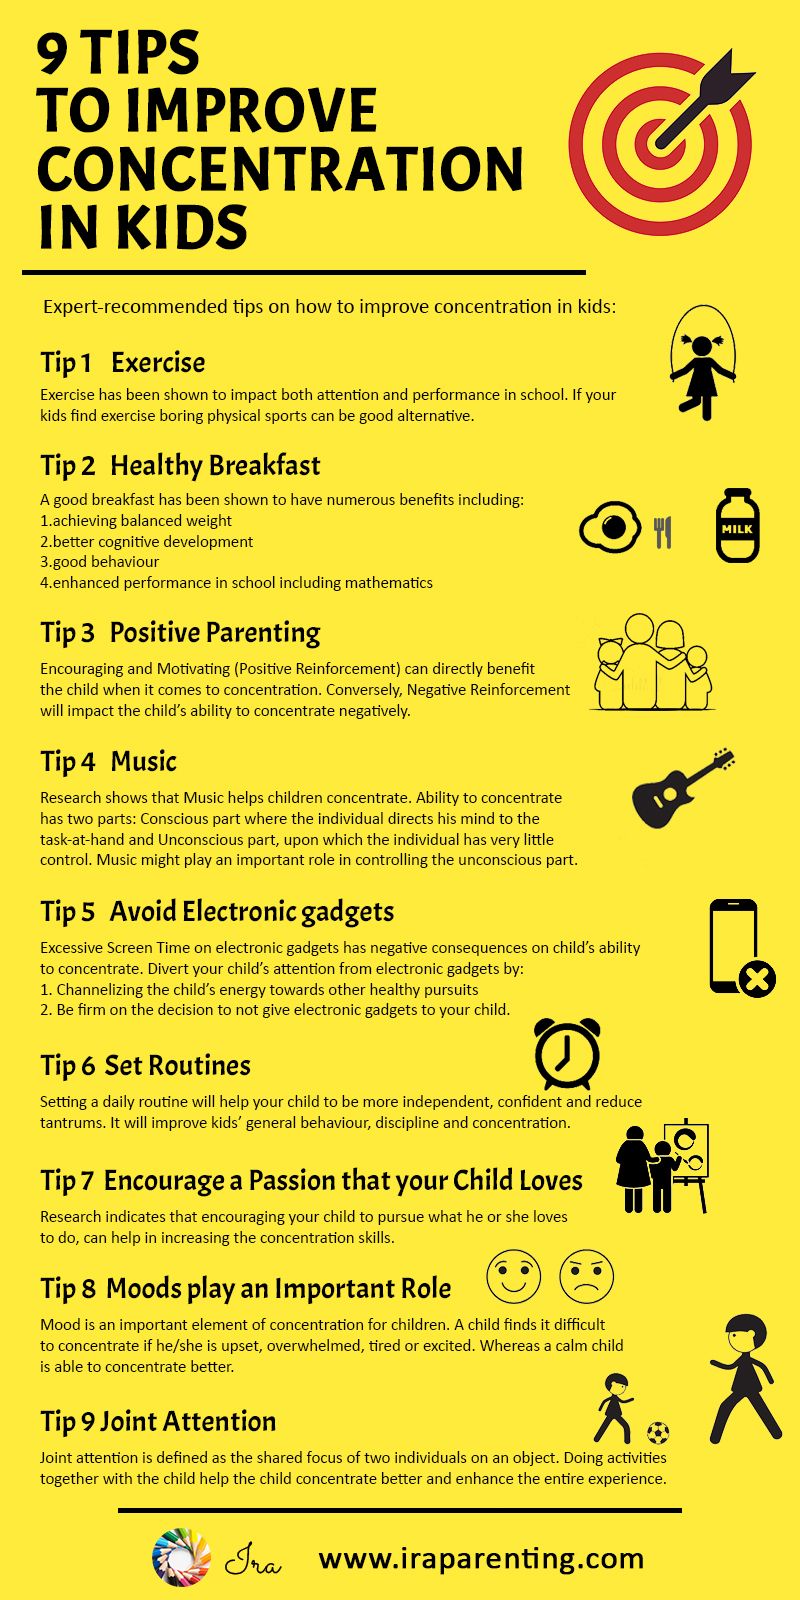 9 Tips to improve concentration in kids